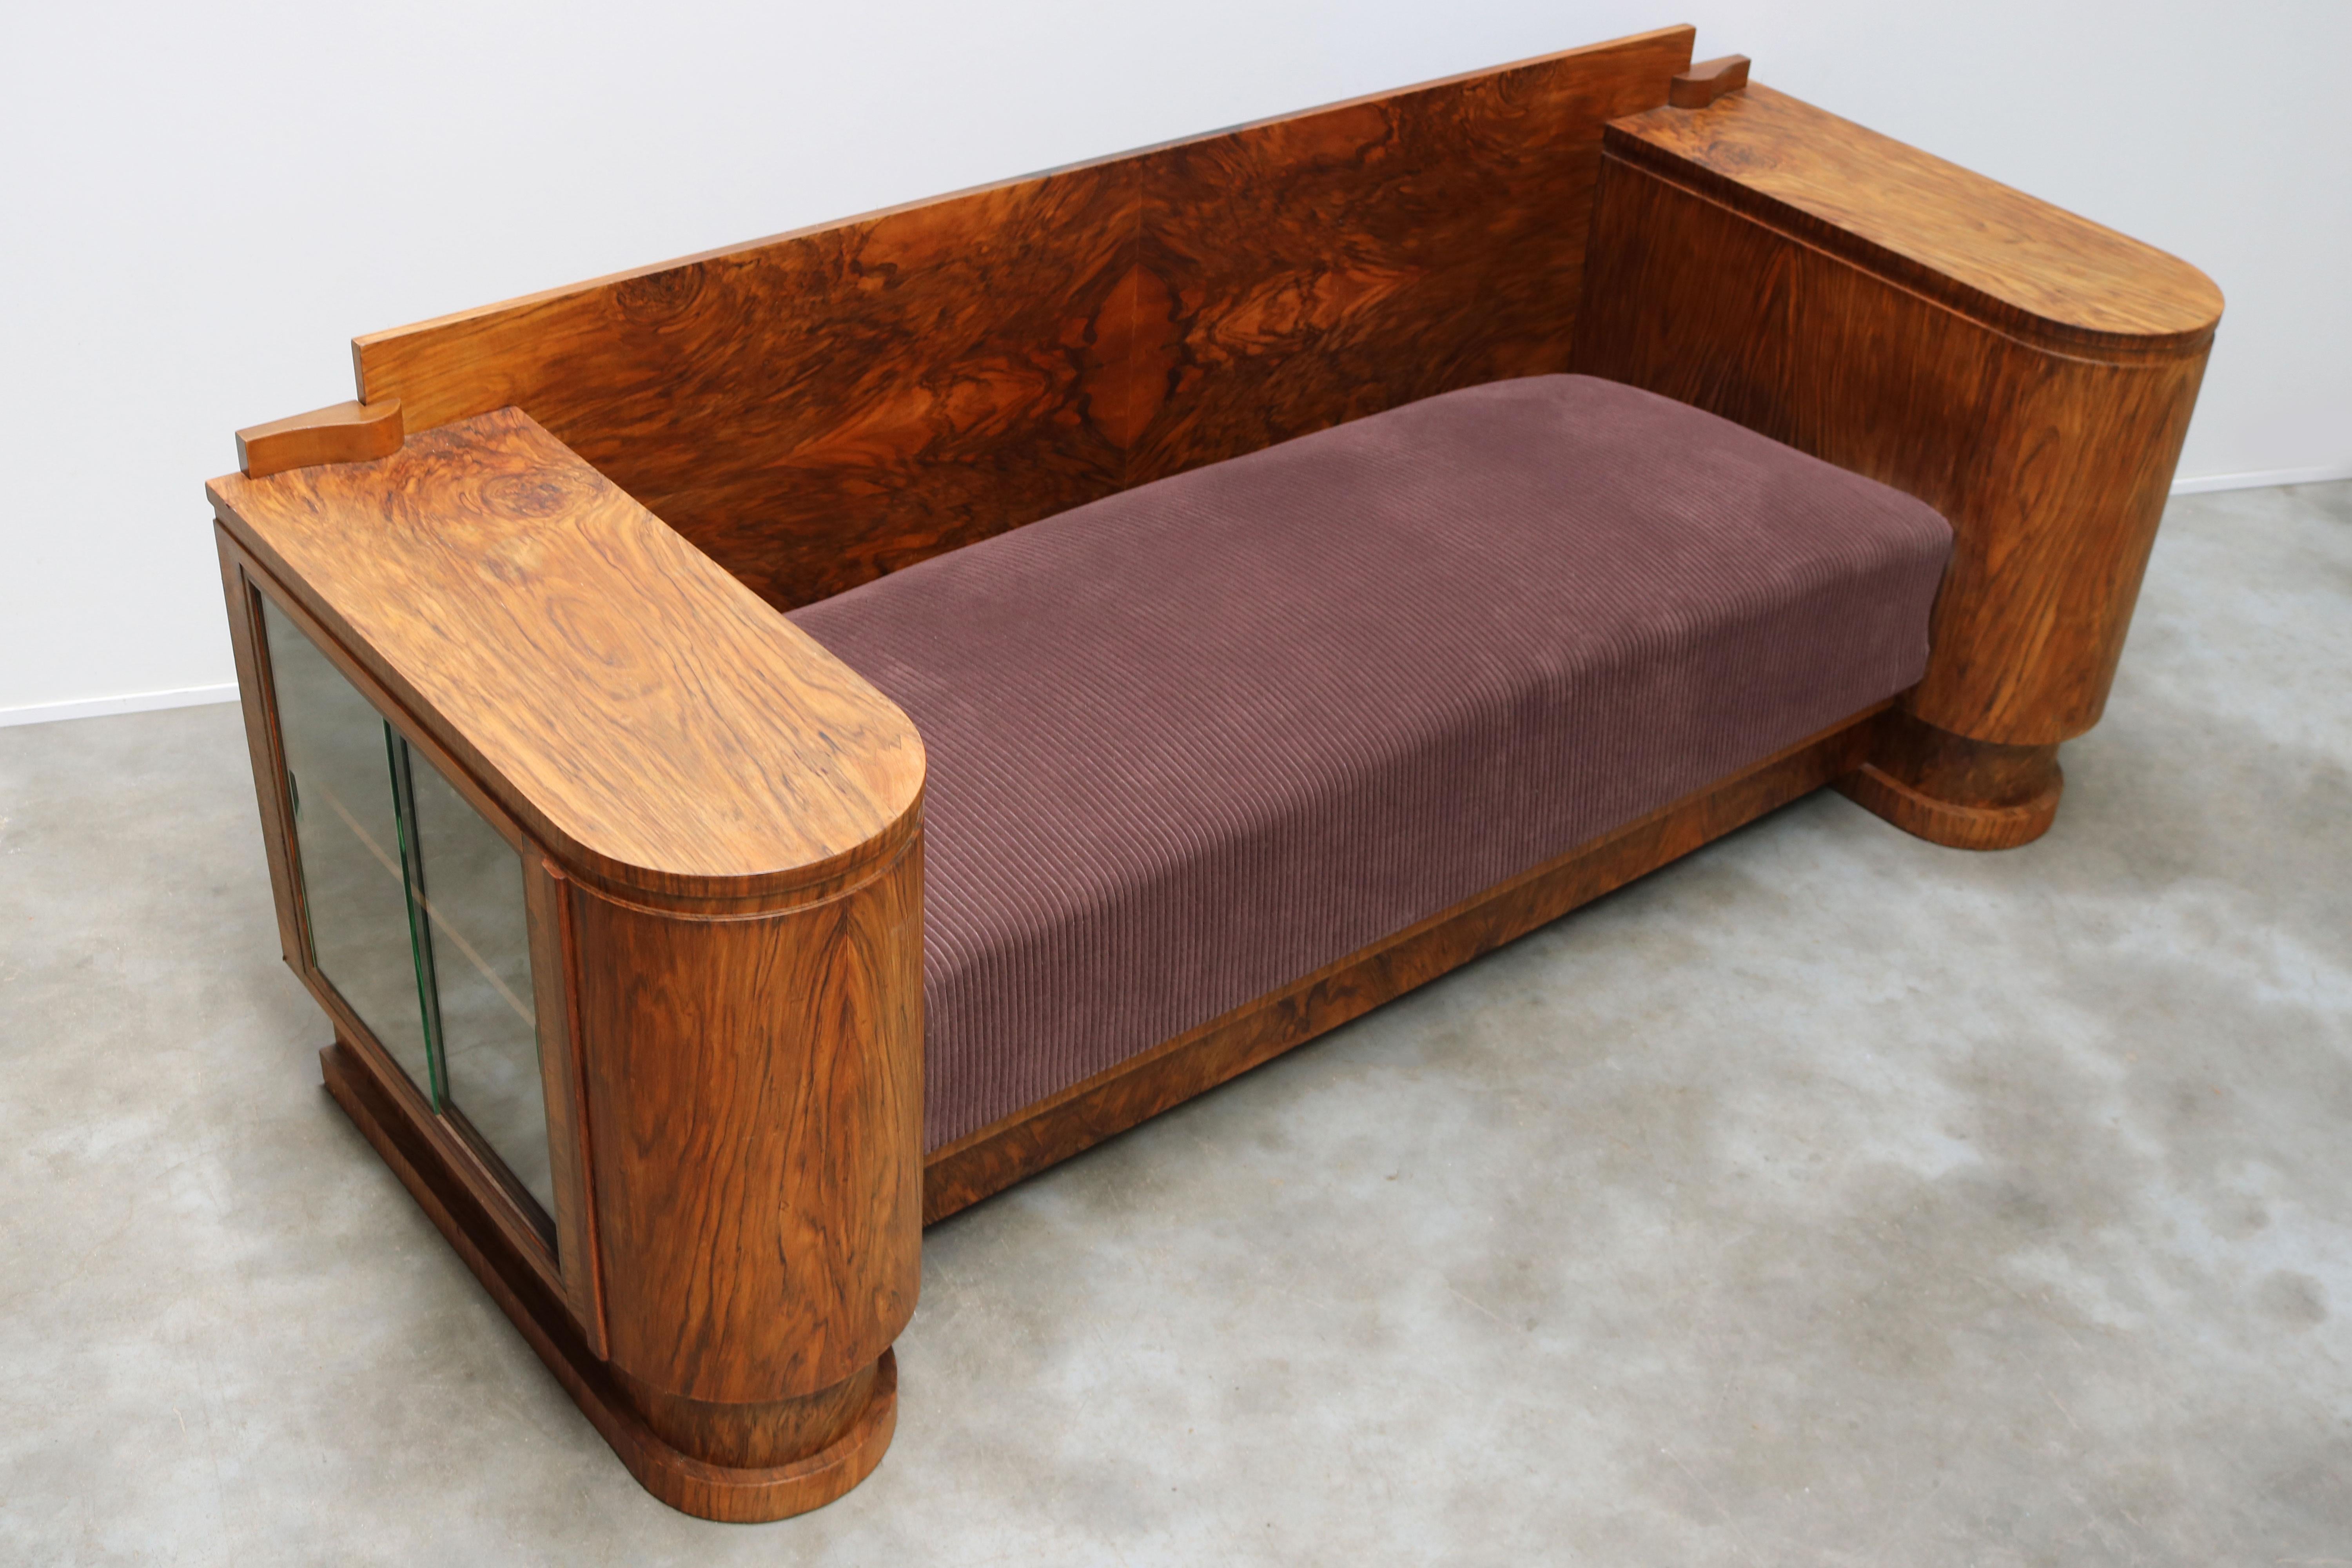 Dutch Art Deco Design Sofa by Pander 1930 Walnut Burl Wood with Display Cabinets For Sale 3